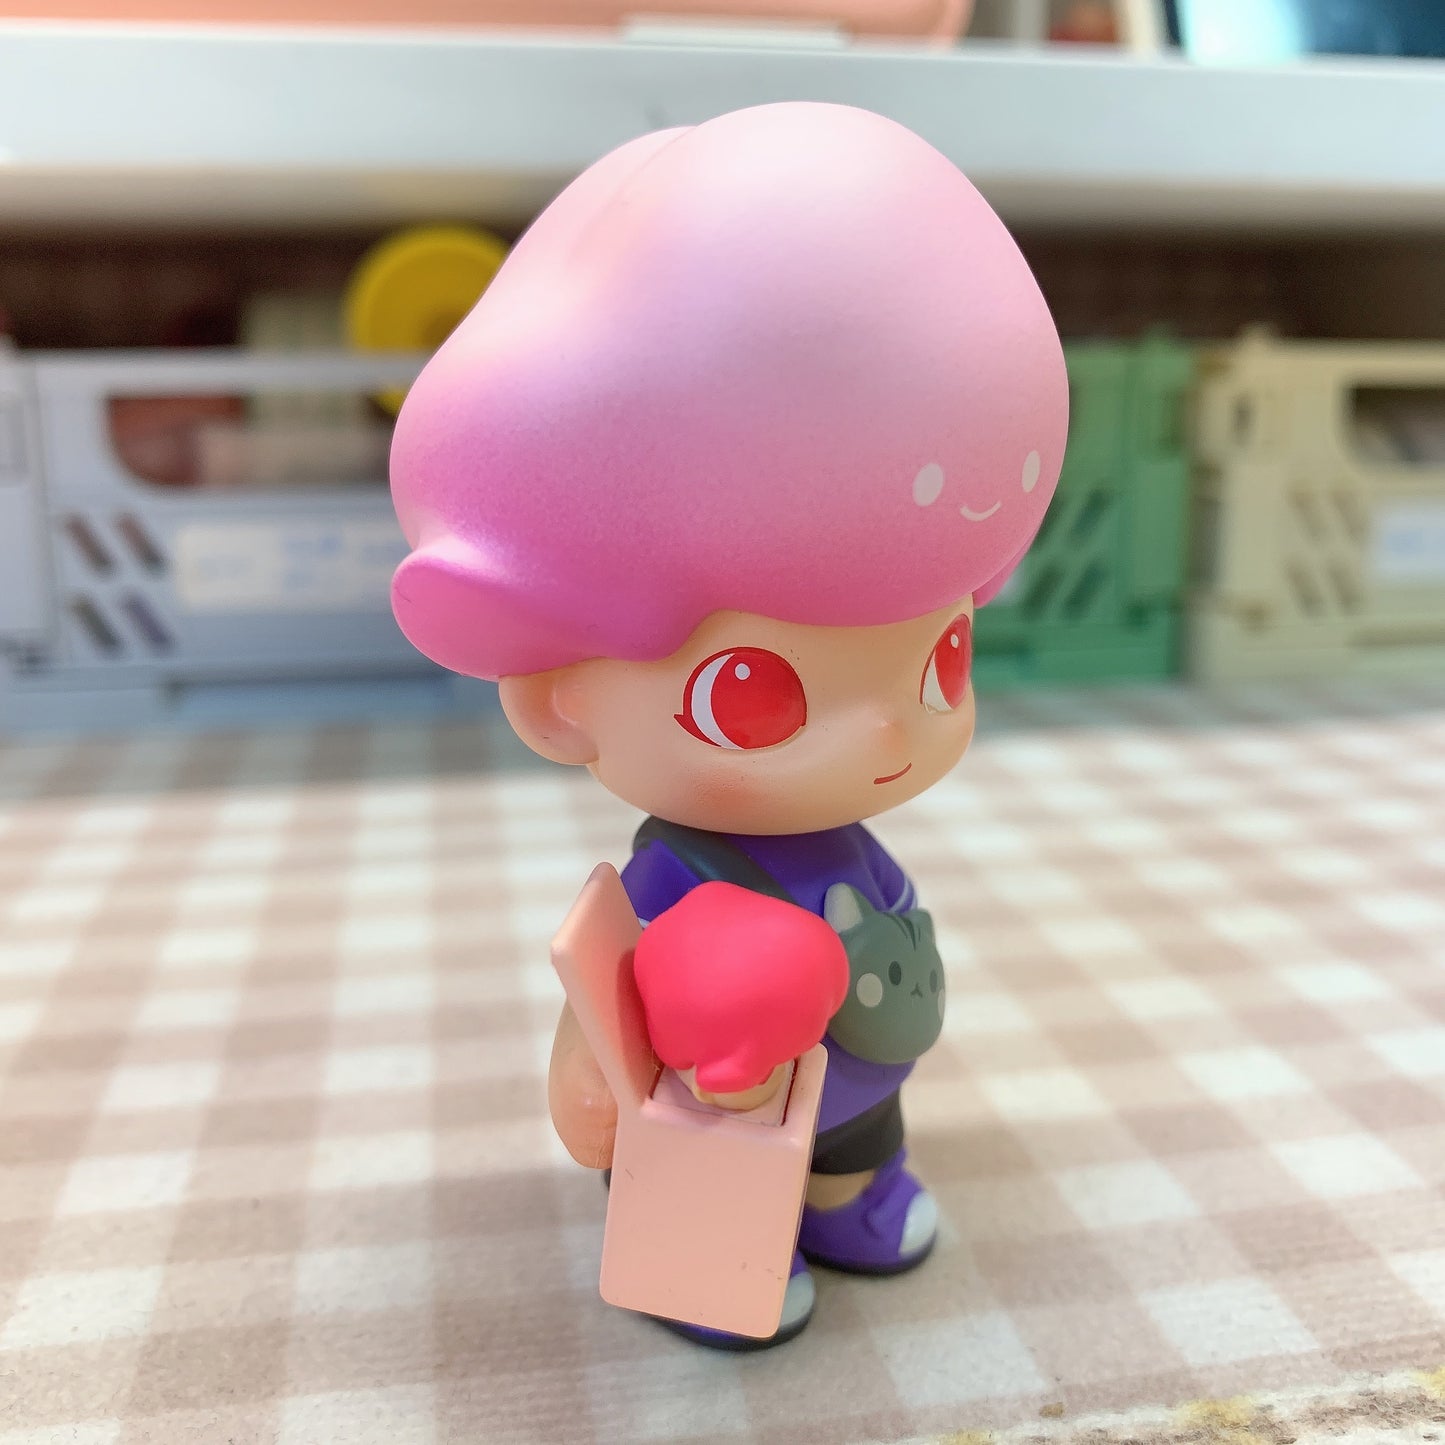 【PRELOVED and SALE 】POPMART Dimoo blind box toy Life University series Art Toy Collector